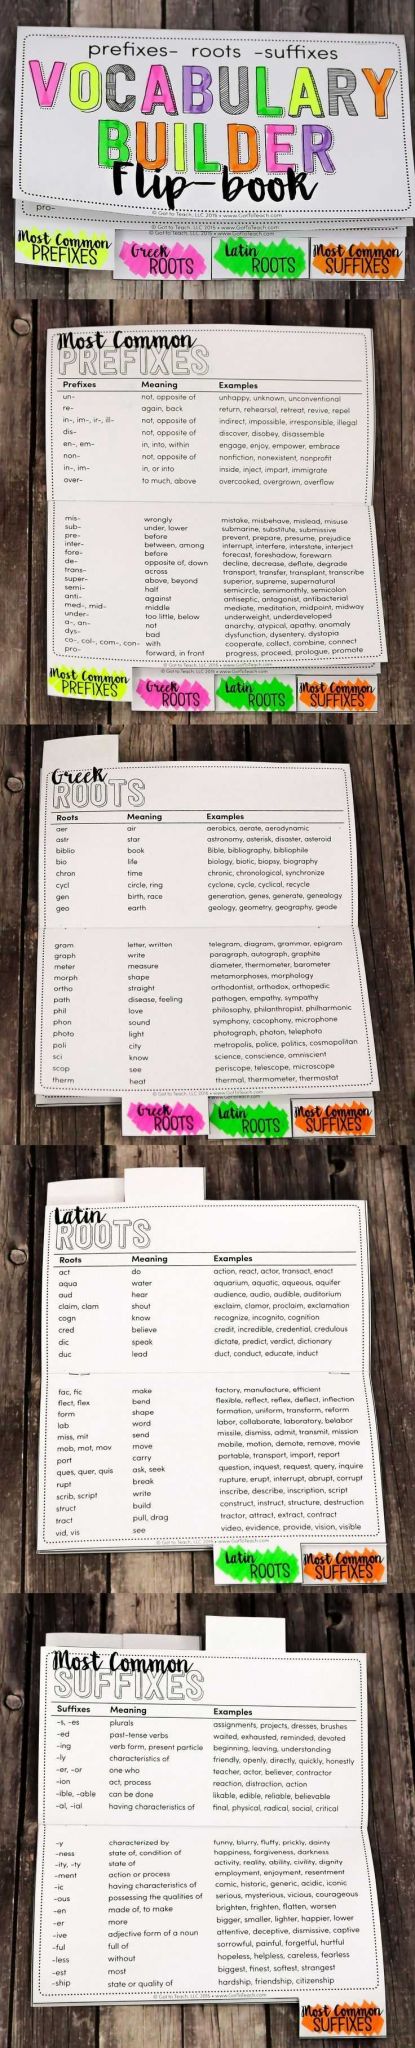 Pollution Vocabulary Worksheet Also 12 Best S Vocabulary Images by ashlyn Garland On Pinterest